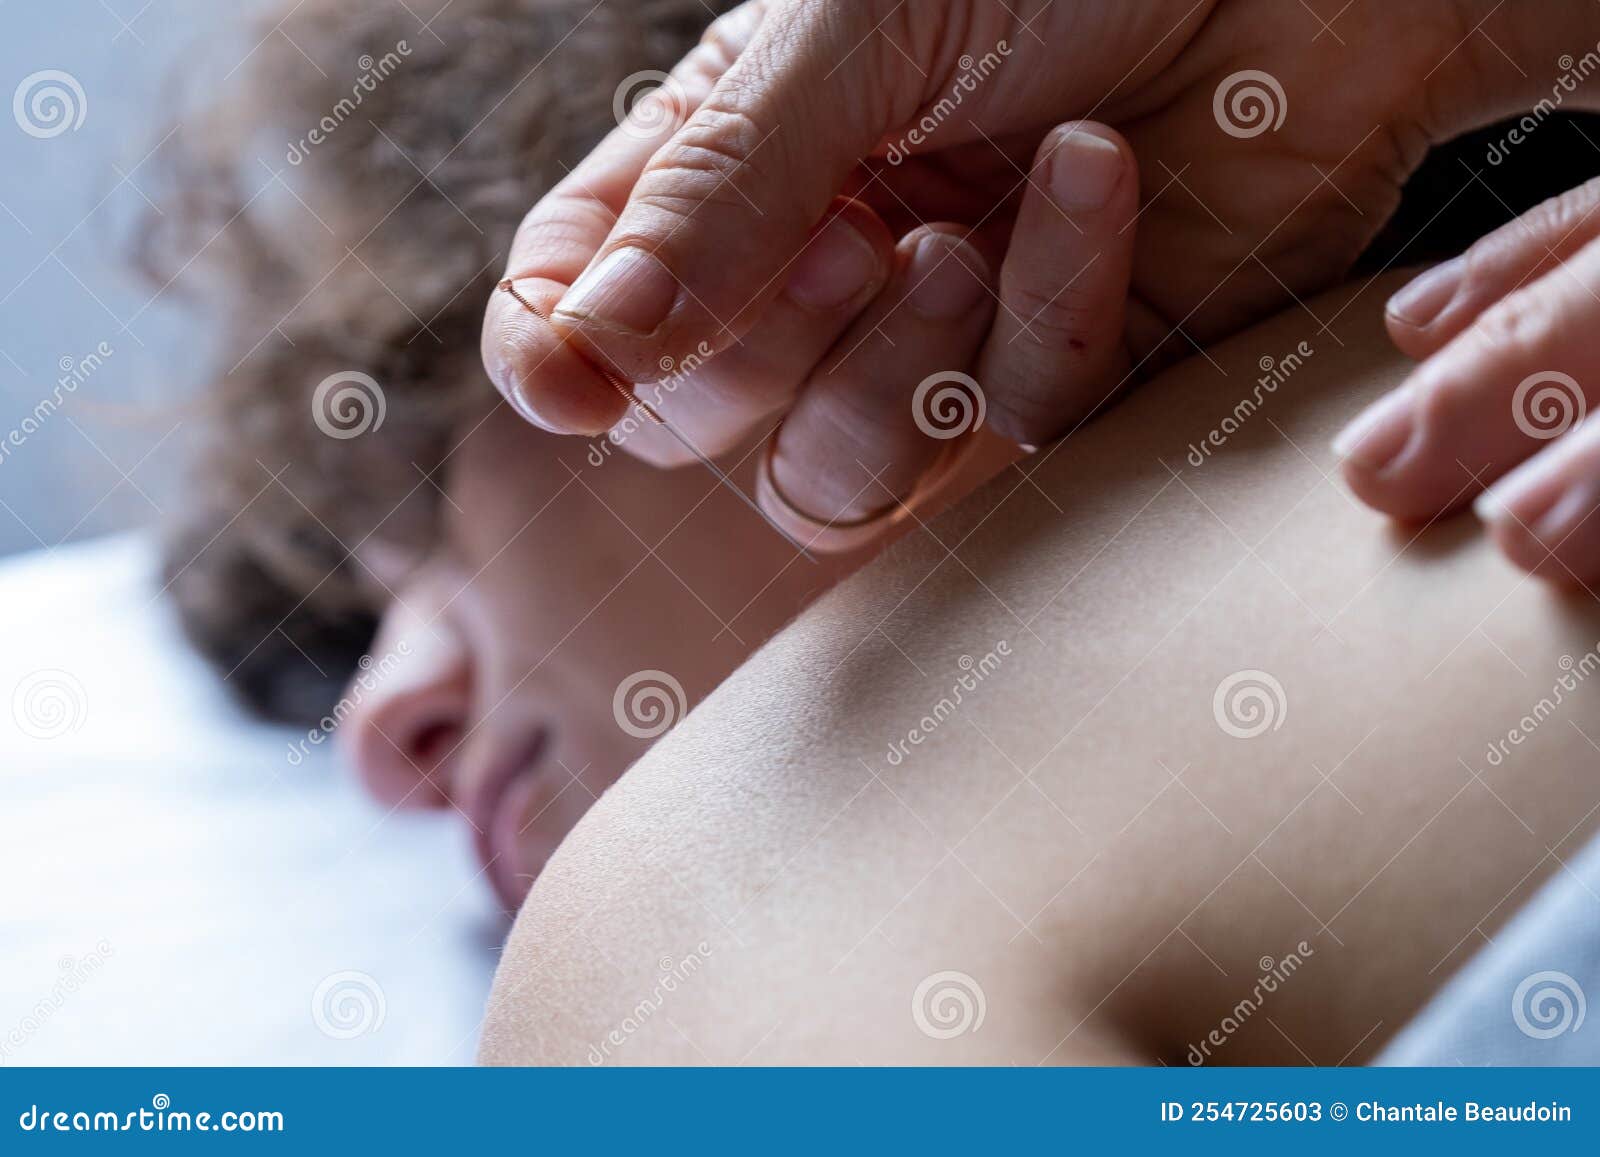 profesional woman giving acupuncture treatment